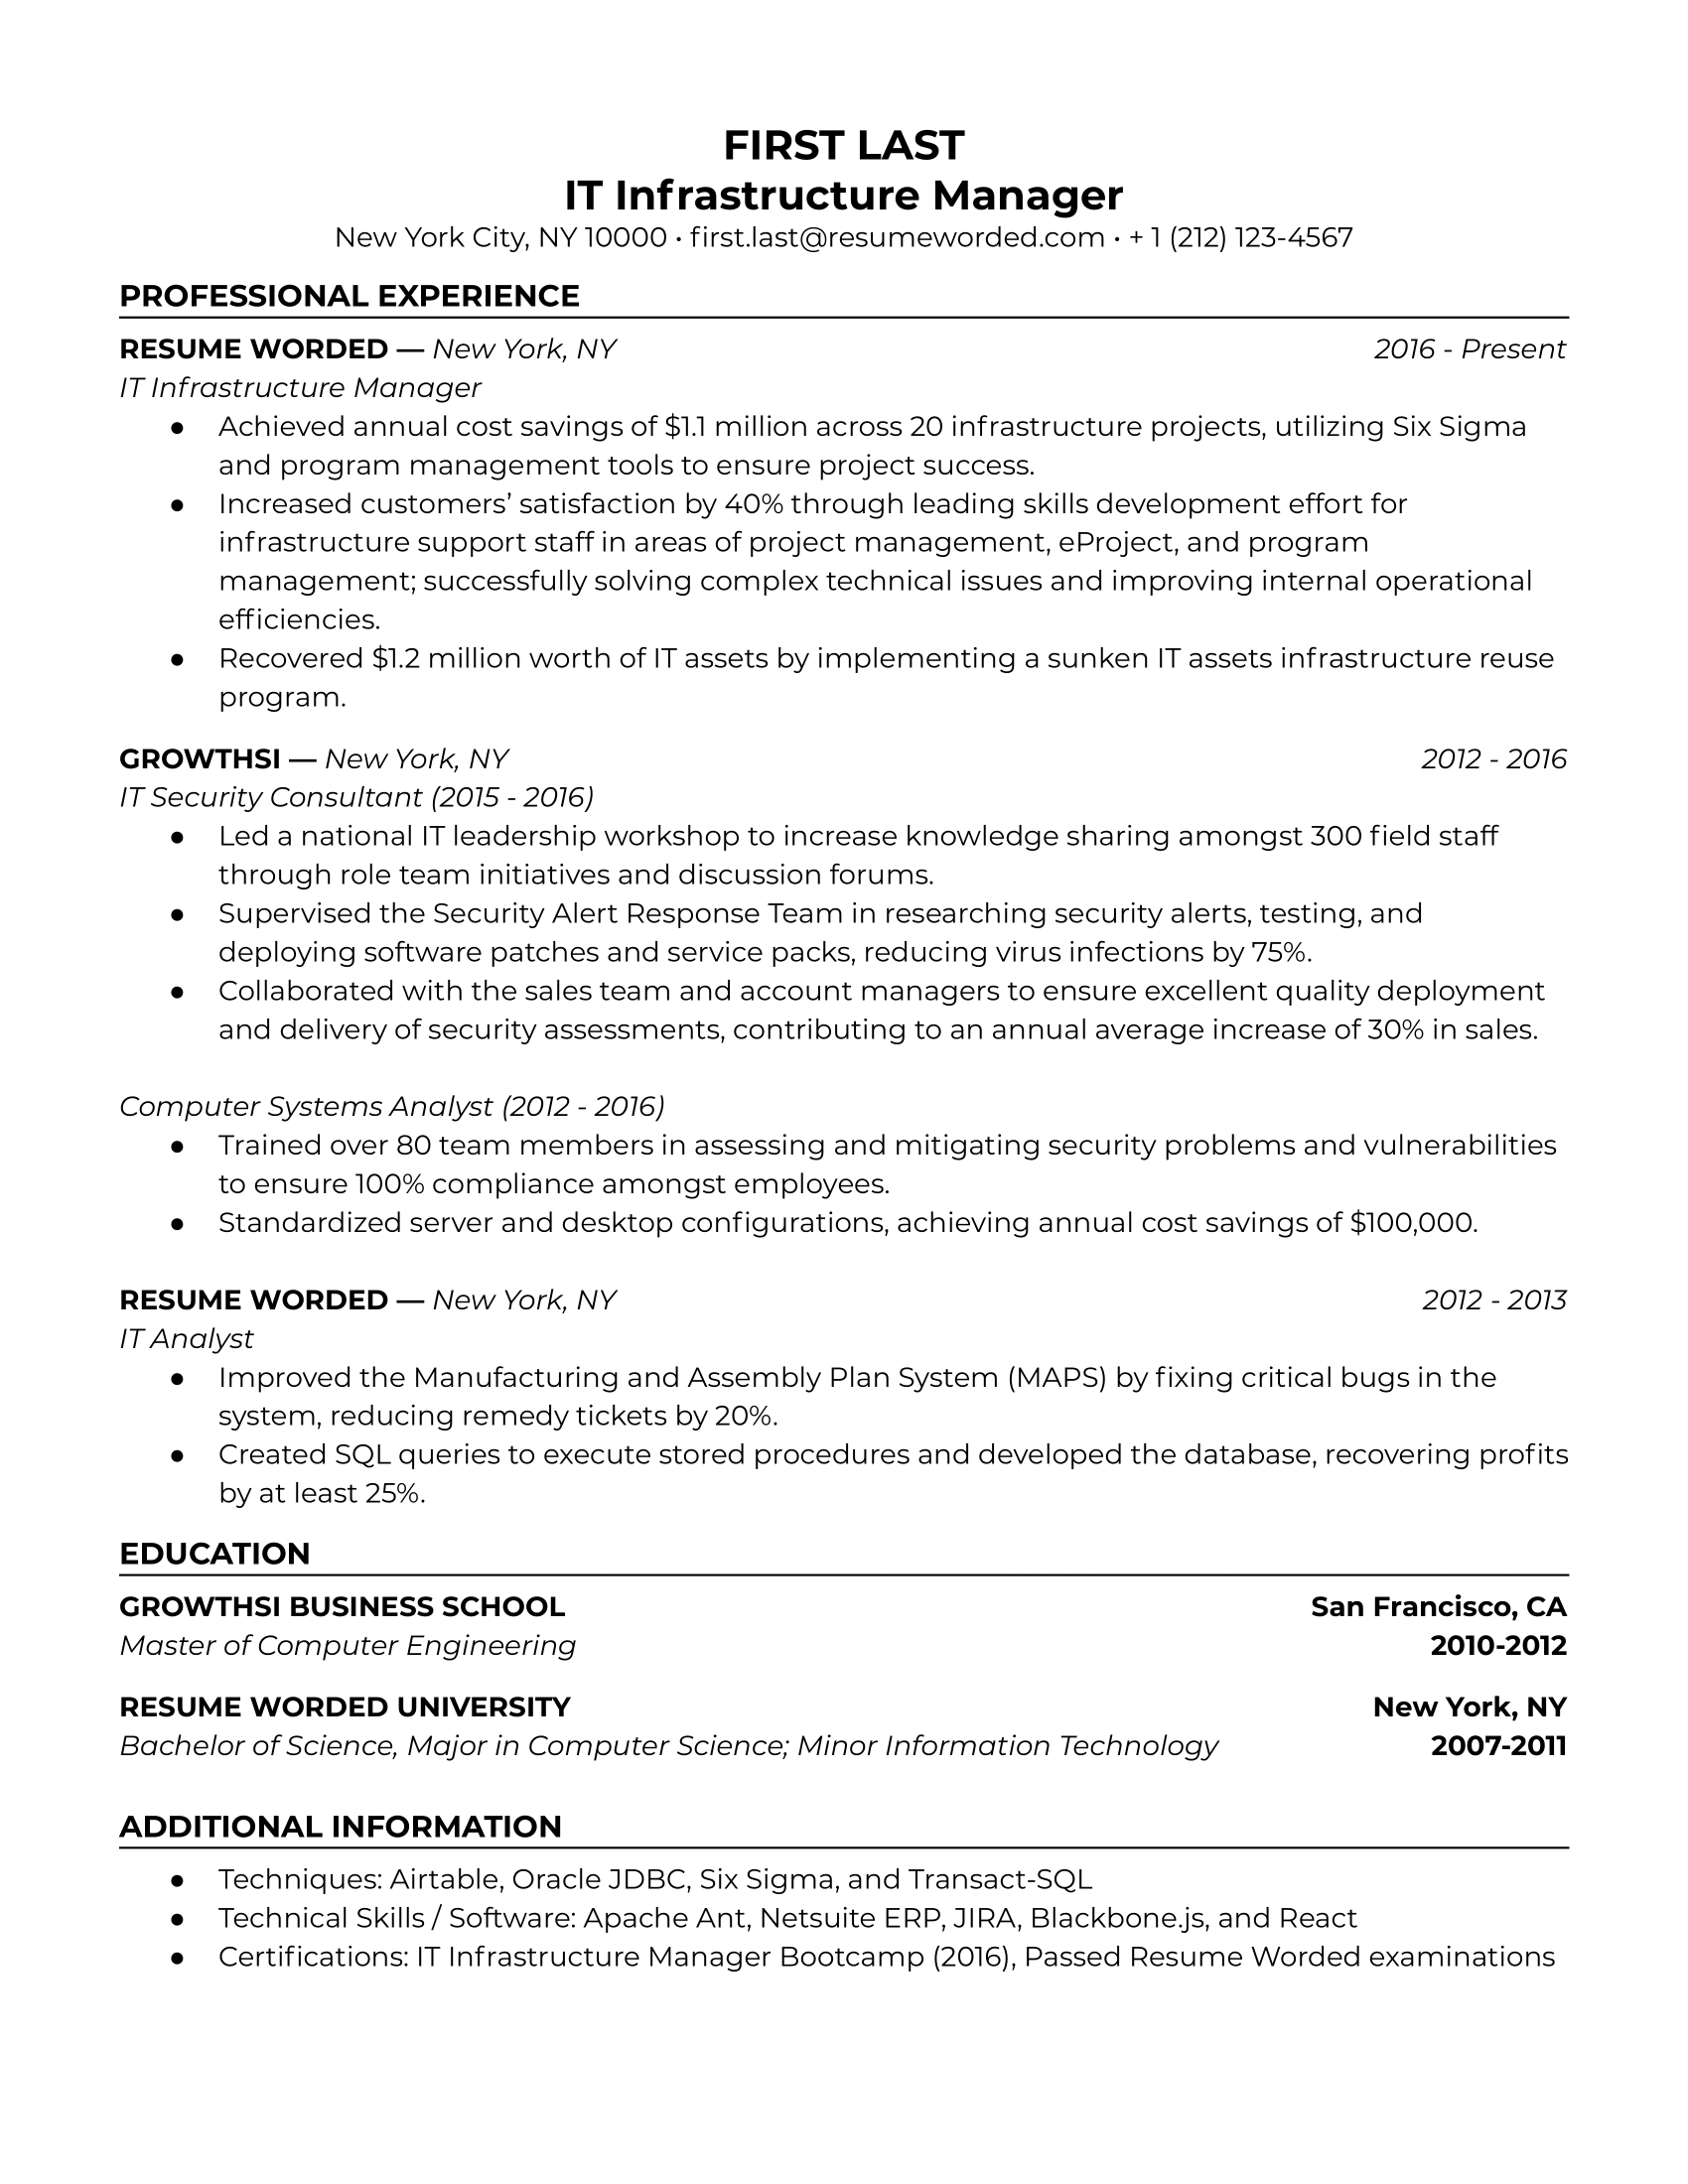 IT Infrastructure Manager Resume Template + Example